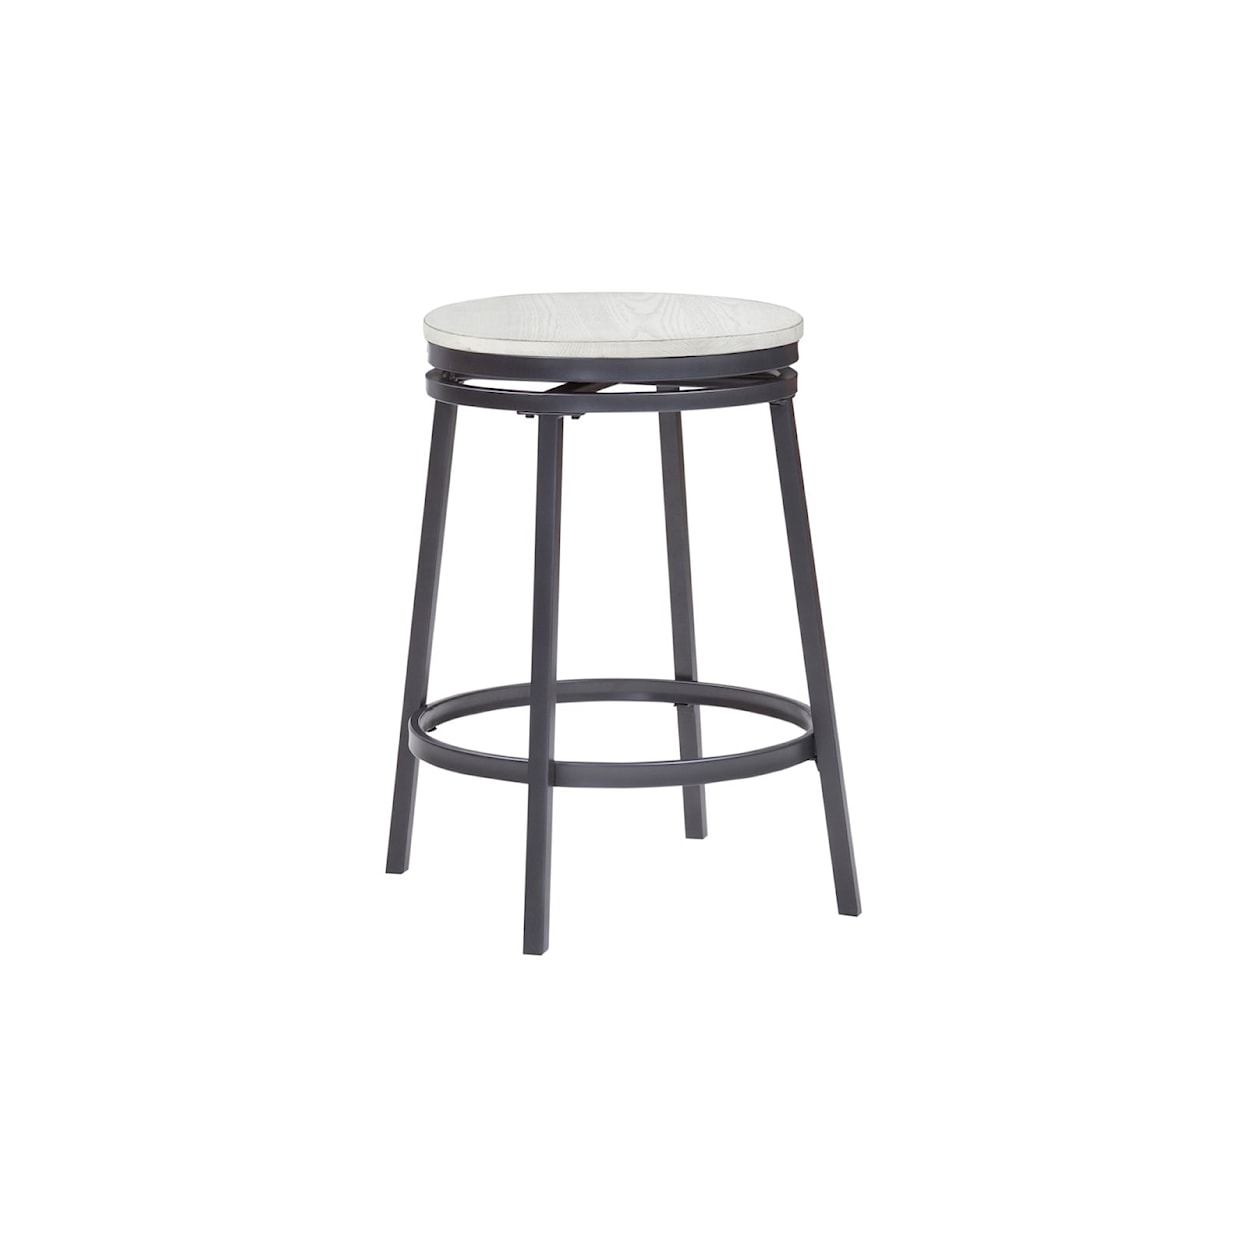 American Woodcrafters Metal Barstools Backless Barstool